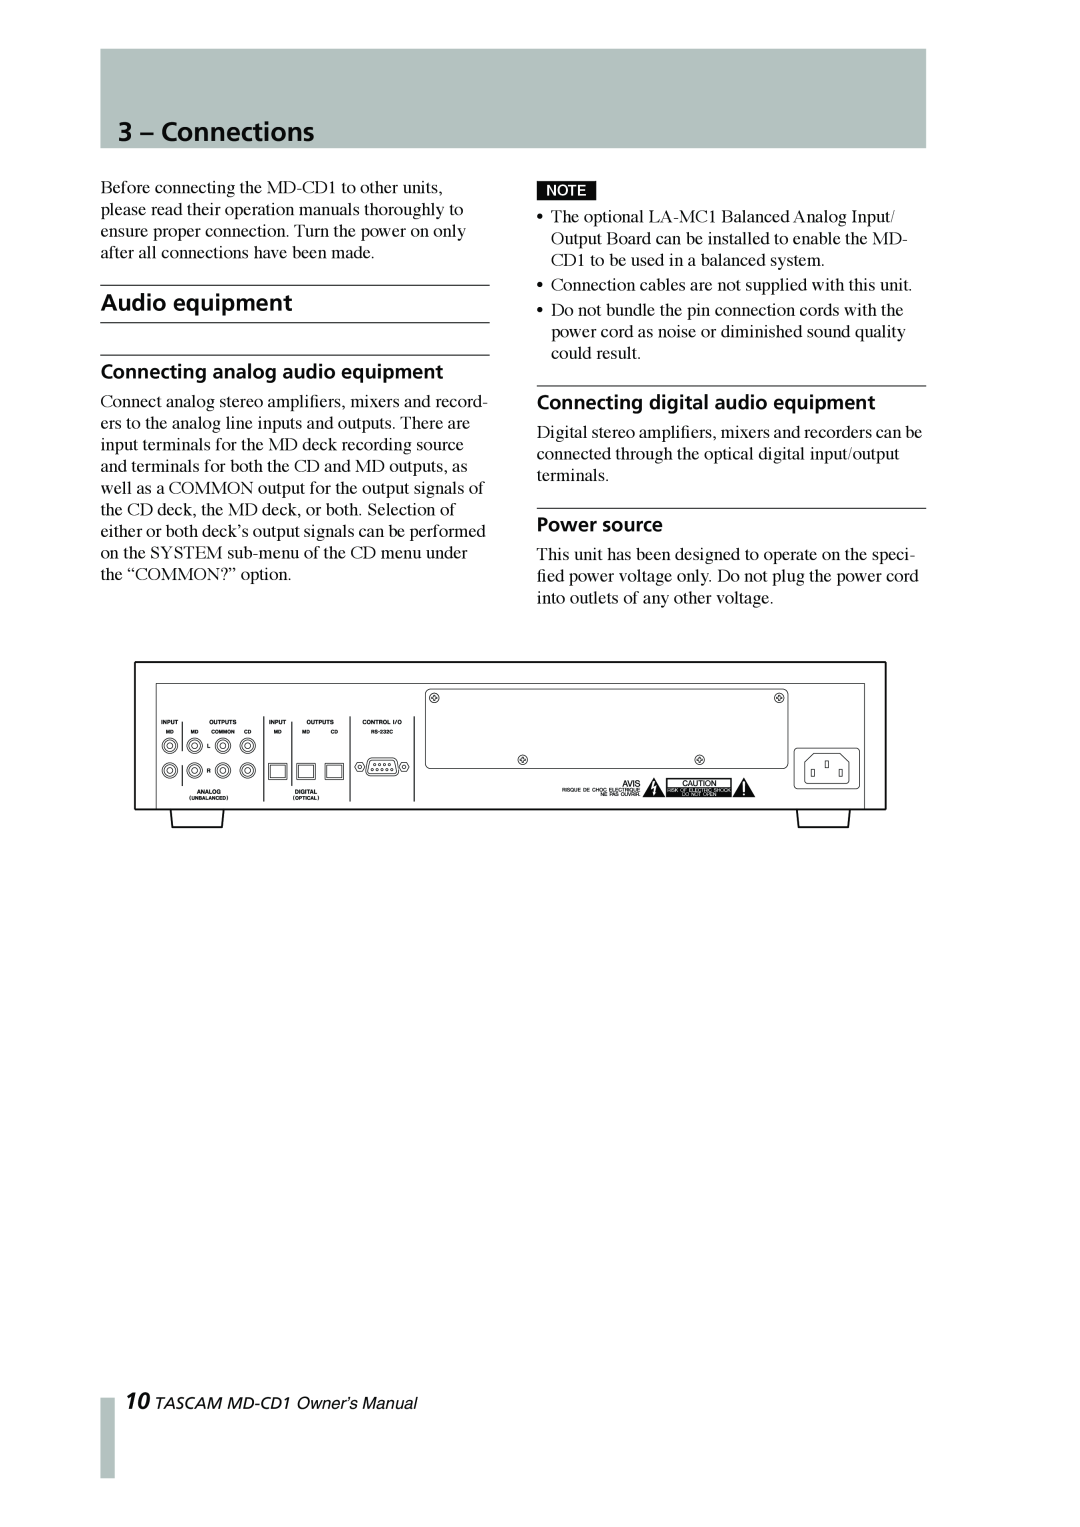 Tascam MD-CD1 owner manual Connections, Audio equipment 